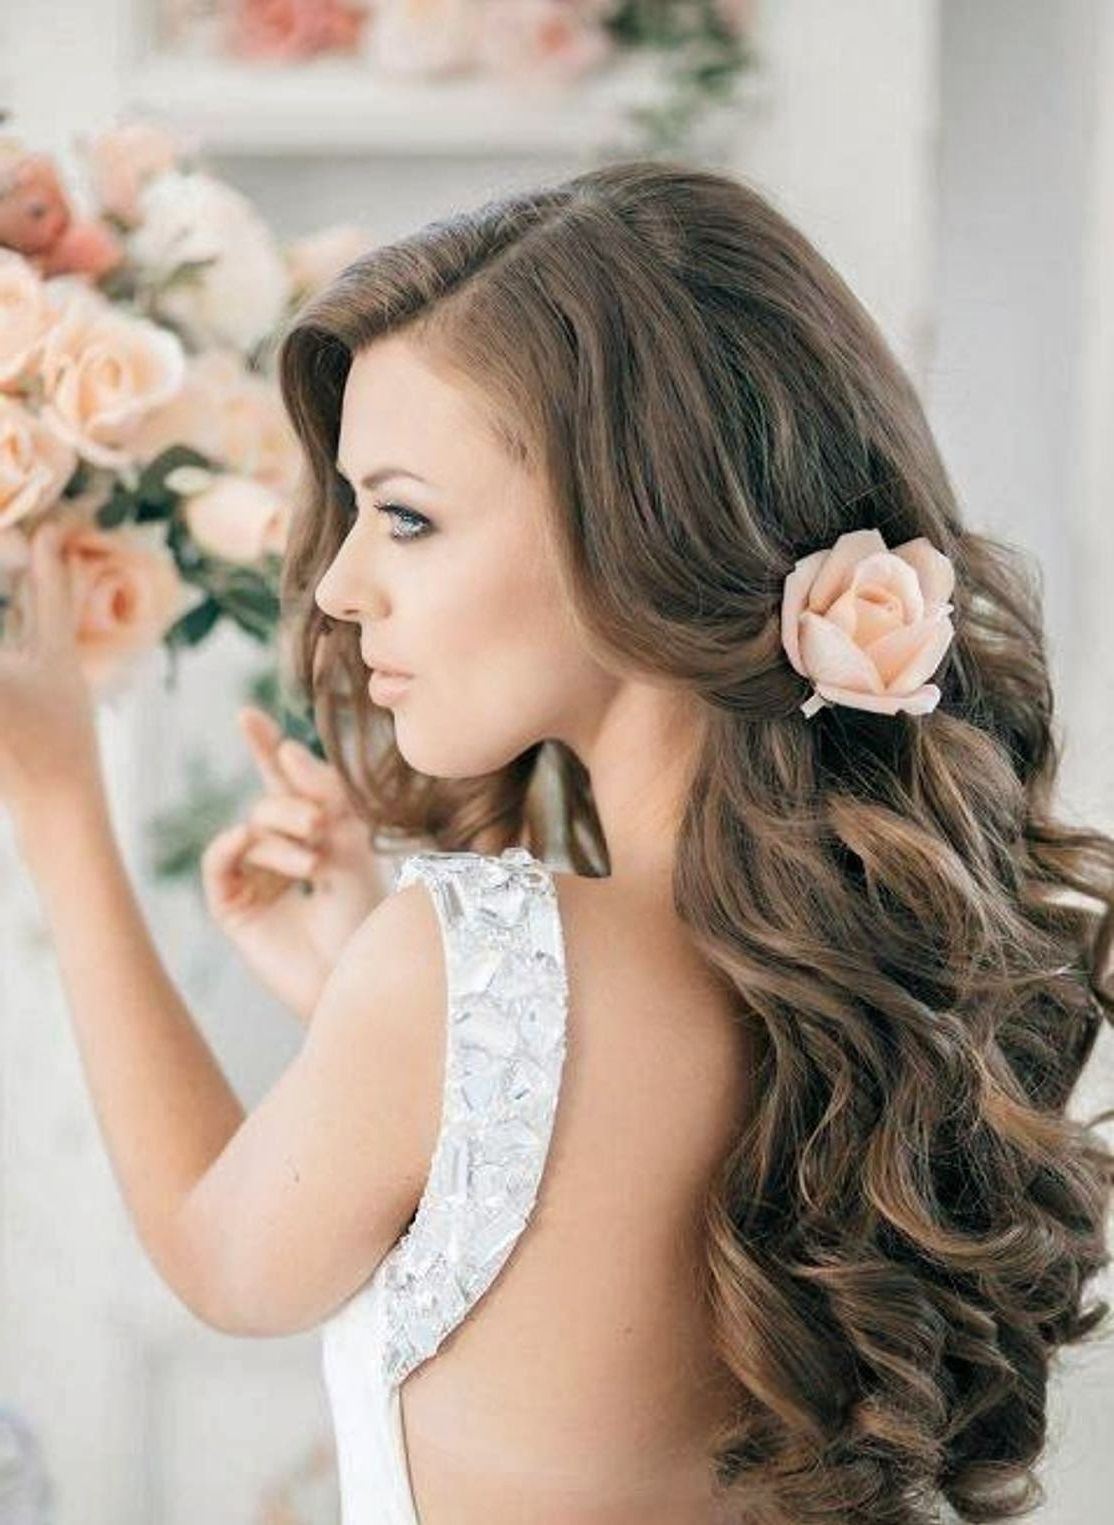 Favorite Wedding Hairstyles For Long Hair With Curls With Regard To Curly Hairstyles For Long Hair For Wedding – Hairstyle For Women & Man (View 14 of 15)